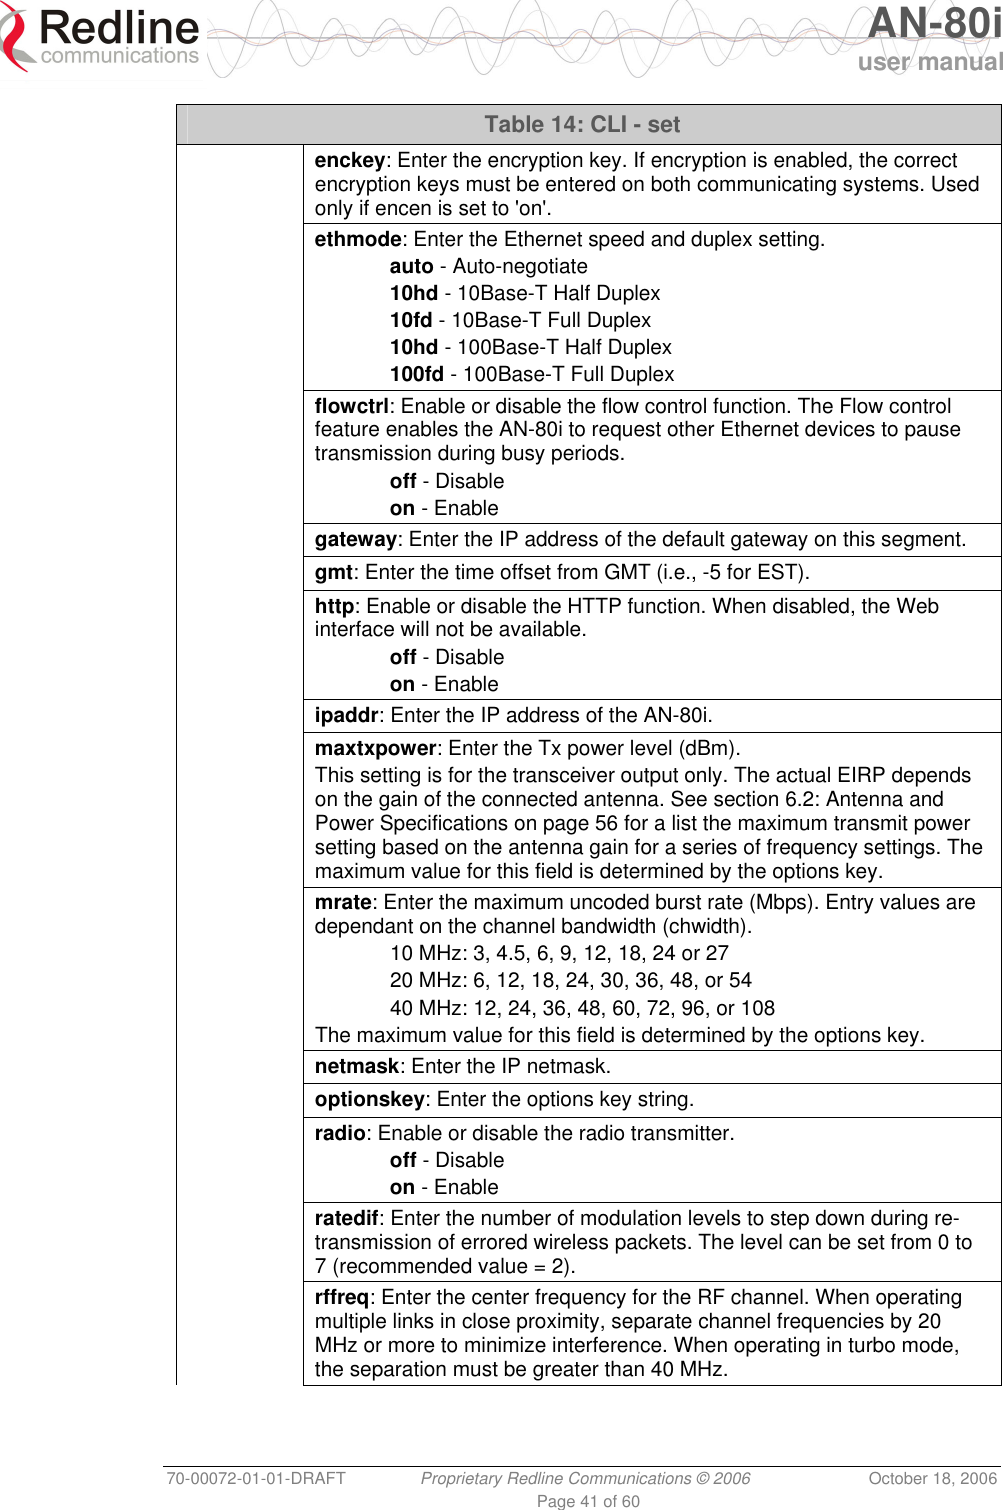   AN-80i user manual 70-00072-01-01-DRAFT  Proprietary Redline Communications © 2006  October 18, 2006 Page 41 of 60 Table 14: CLI - set  enckey: Enter the encryption key. If encryption is enabled, the correct encryption keys must be entered on both communicating systems. Used only if encen is set to &apos;on&apos;.  ethmode: Enter the Ethernet speed and duplex setting.  auto - Auto-negotiate  10hd - 10Base-T Half Duplex  10fd - 10Base-T Full Duplex  10hd - 100Base-T Half Duplex  100fd - 100Base-T Full Duplex  flowctrl: Enable or disable the flow control function. The Flow control feature enables the AN-80i to request other Ethernet devices to pause transmission during busy periods.  off - Disable  on - Enable  gateway: Enter the IP address of the default gateway on this segment.  gmt: Enter the time offset from GMT (i.e., -5 for EST).  http: Enable or disable the HTTP function. When disabled, the Web interface will not be available.  off - Disable  on - Enable  ipaddr: Enter the IP address of the AN-80i.  maxtxpower: Enter the Tx power level (dBm). This setting is for the transceiver output only. The actual EIRP depends on the gain of the connected antenna. See section 6.2: Antenna and Power Specifications on page 56 for a list the maximum transmit power setting based on the antenna gain for a series of frequency settings. The maximum value for this field is determined by the options key.  mrate: Enter the maximum uncoded burst rate (Mbps). Entry values are dependant on the channel bandwidth (chwidth).  10 MHz: 3, 4.5, 6, 9, 12, 18, 24 or 27   20 MHz: 6, 12, 18, 24, 30, 36, 48, or 54   40 MHz: 12, 24, 36, 48, 60, 72, 96, or 108  The maximum value for this field is determined by the options key.  netmask: Enter the IP netmask.  optionskey: Enter the options key string.  radio: Enable or disable the radio transmitter.  off - Disable  on - Enable  ratedif: Enter the number of modulation levels to step down during re-transmission of errored wireless packets. The level can be set from 0 to 7 (recommended value = 2).  rffreq: Enter the center frequency for the RF channel. When operating multiple links in close proximity, separate channel frequencies by 20 MHz or more to minimize interference. When operating in turbo mode, the separation must be greater than 40 MHz. 